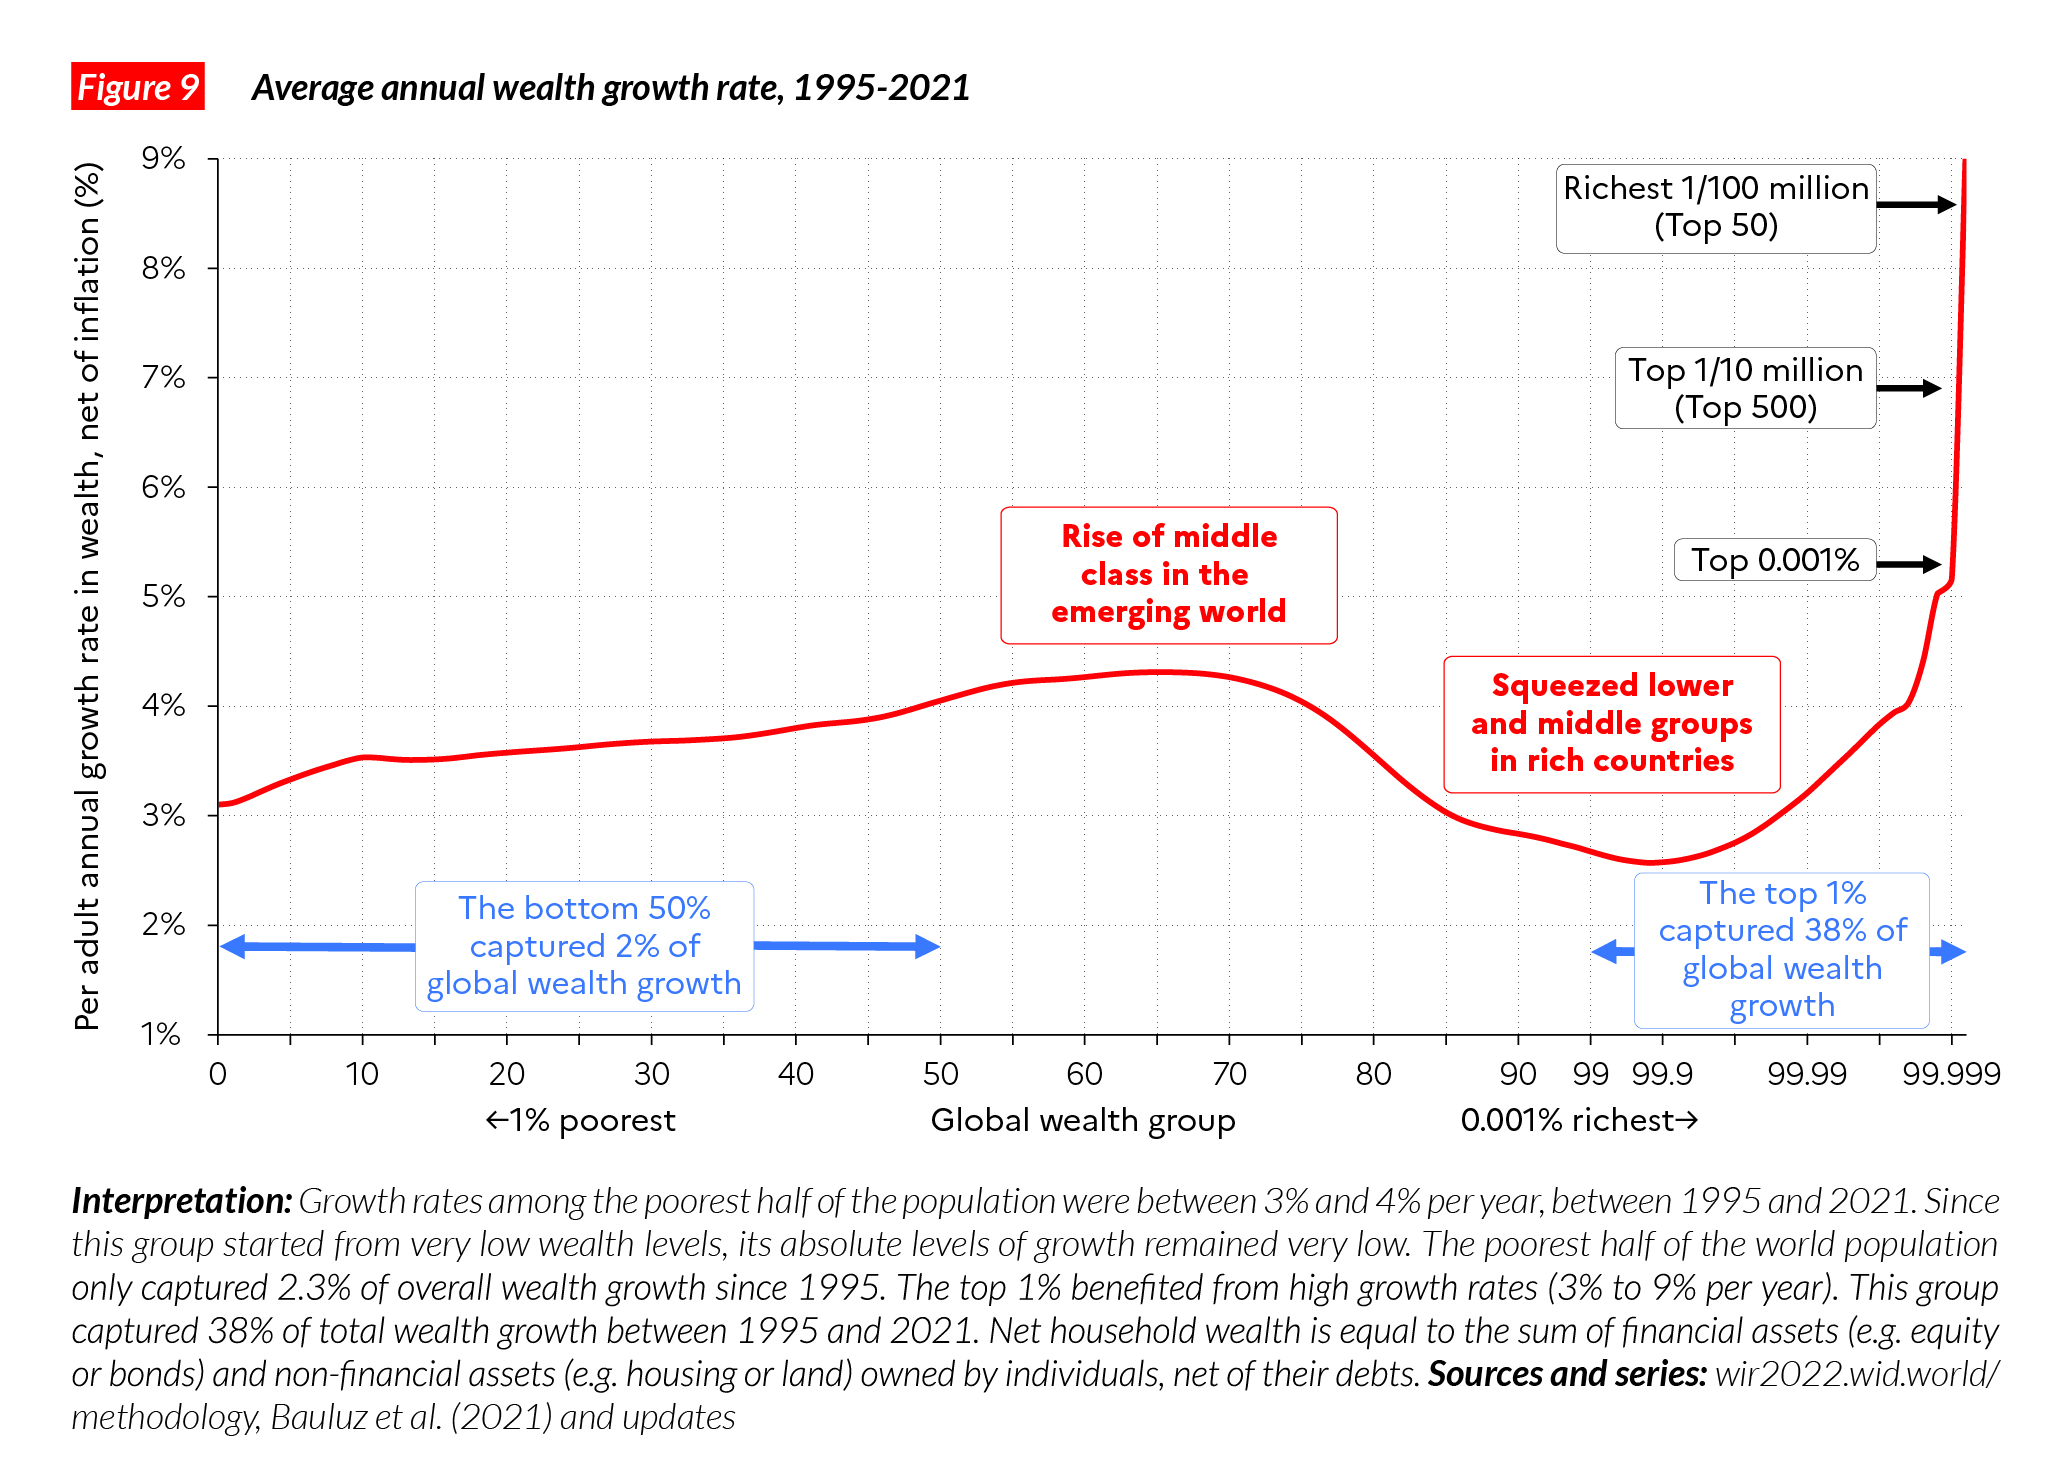 F9. Average annual wealth growth rate